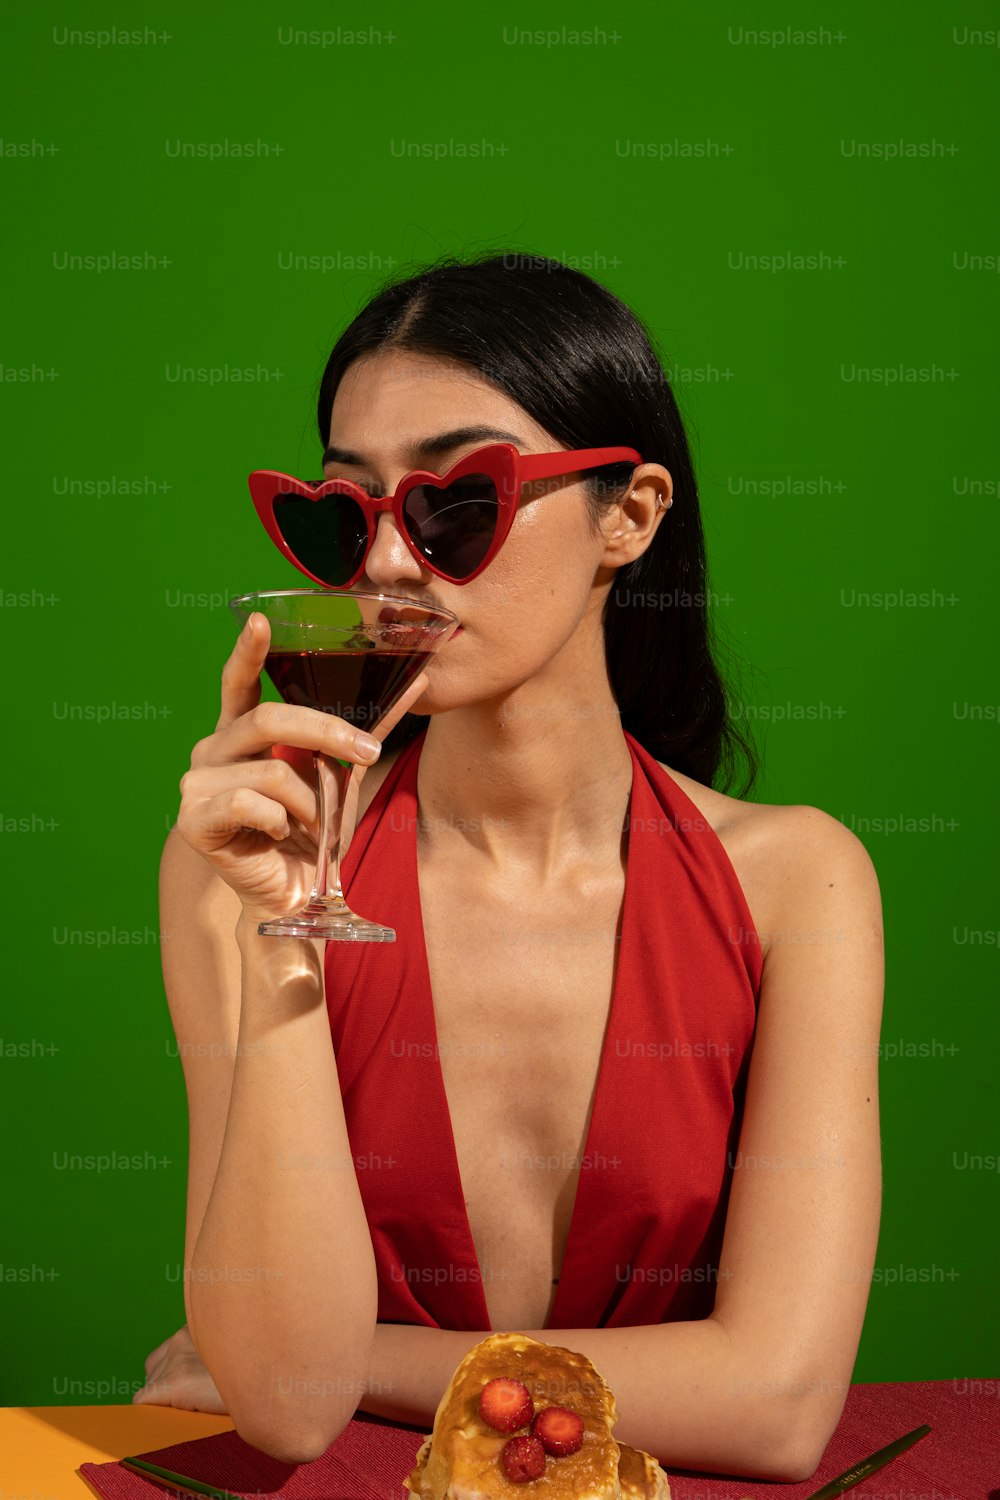 a woman in a red dress holding a glass of wine